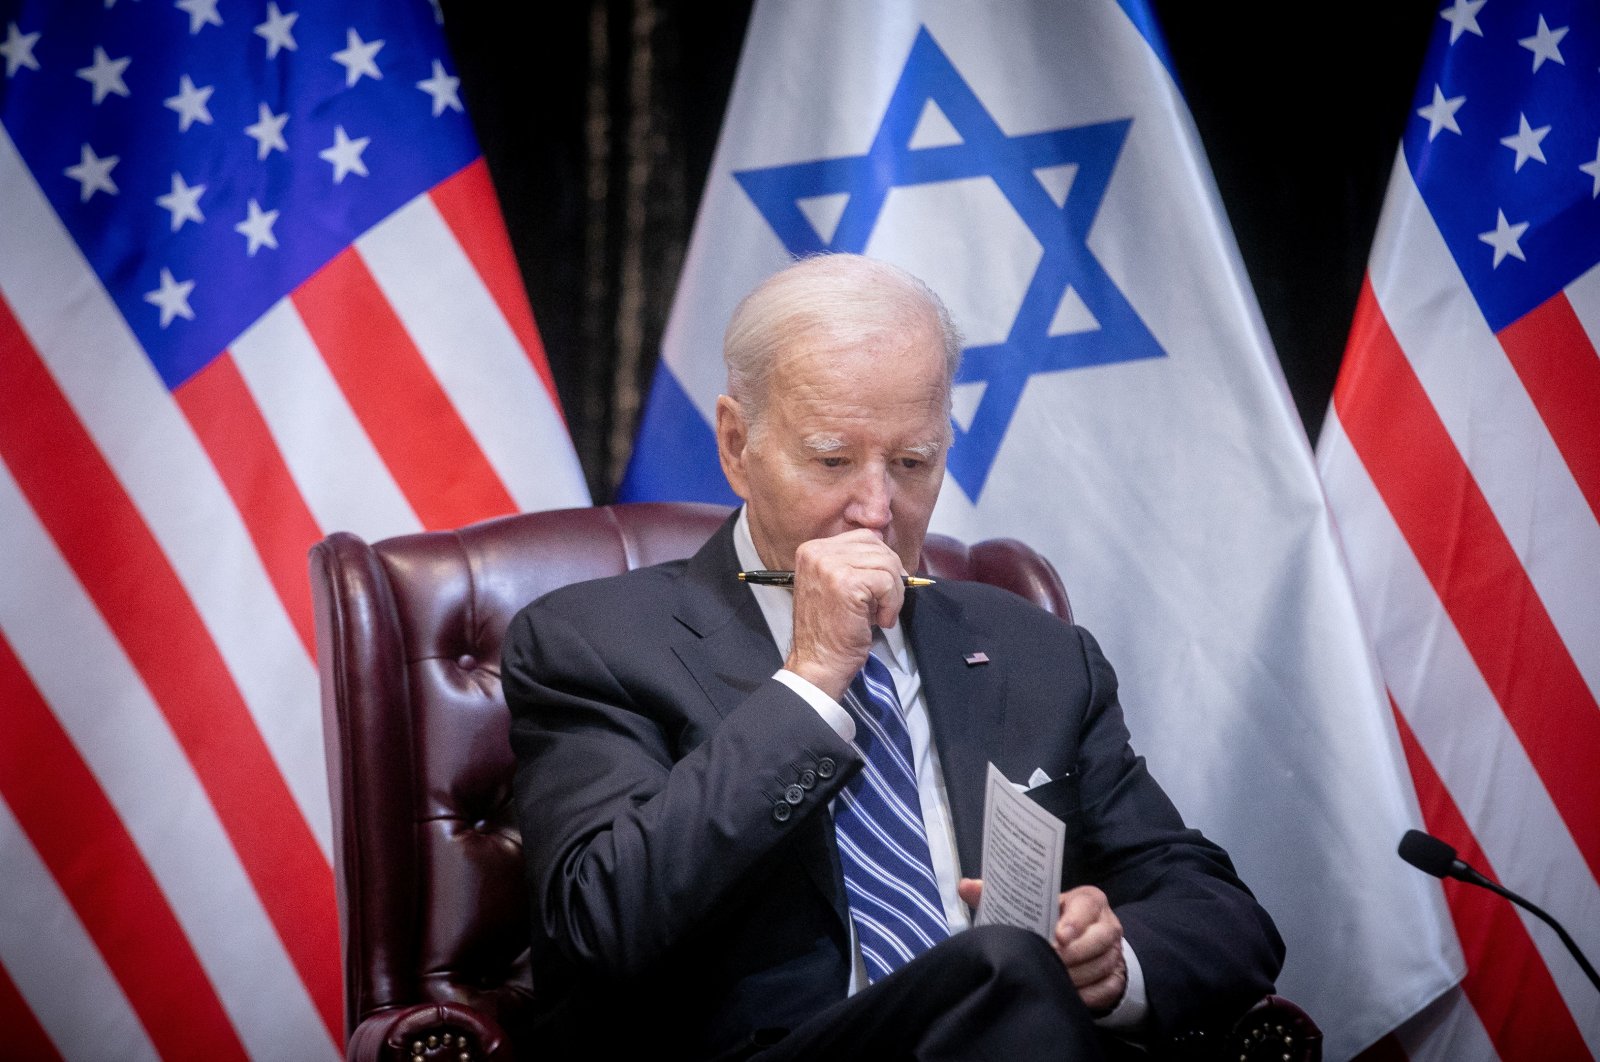 U.S. President Joe Biden pauses during a meeting with Israeli Prime Minister Benjamin Netanyahu, as they discuss the ongoing conflict between Israel and Palestine, in Tel Aviv, Israel, Oct. 18, 2023. (Reuters Photo)